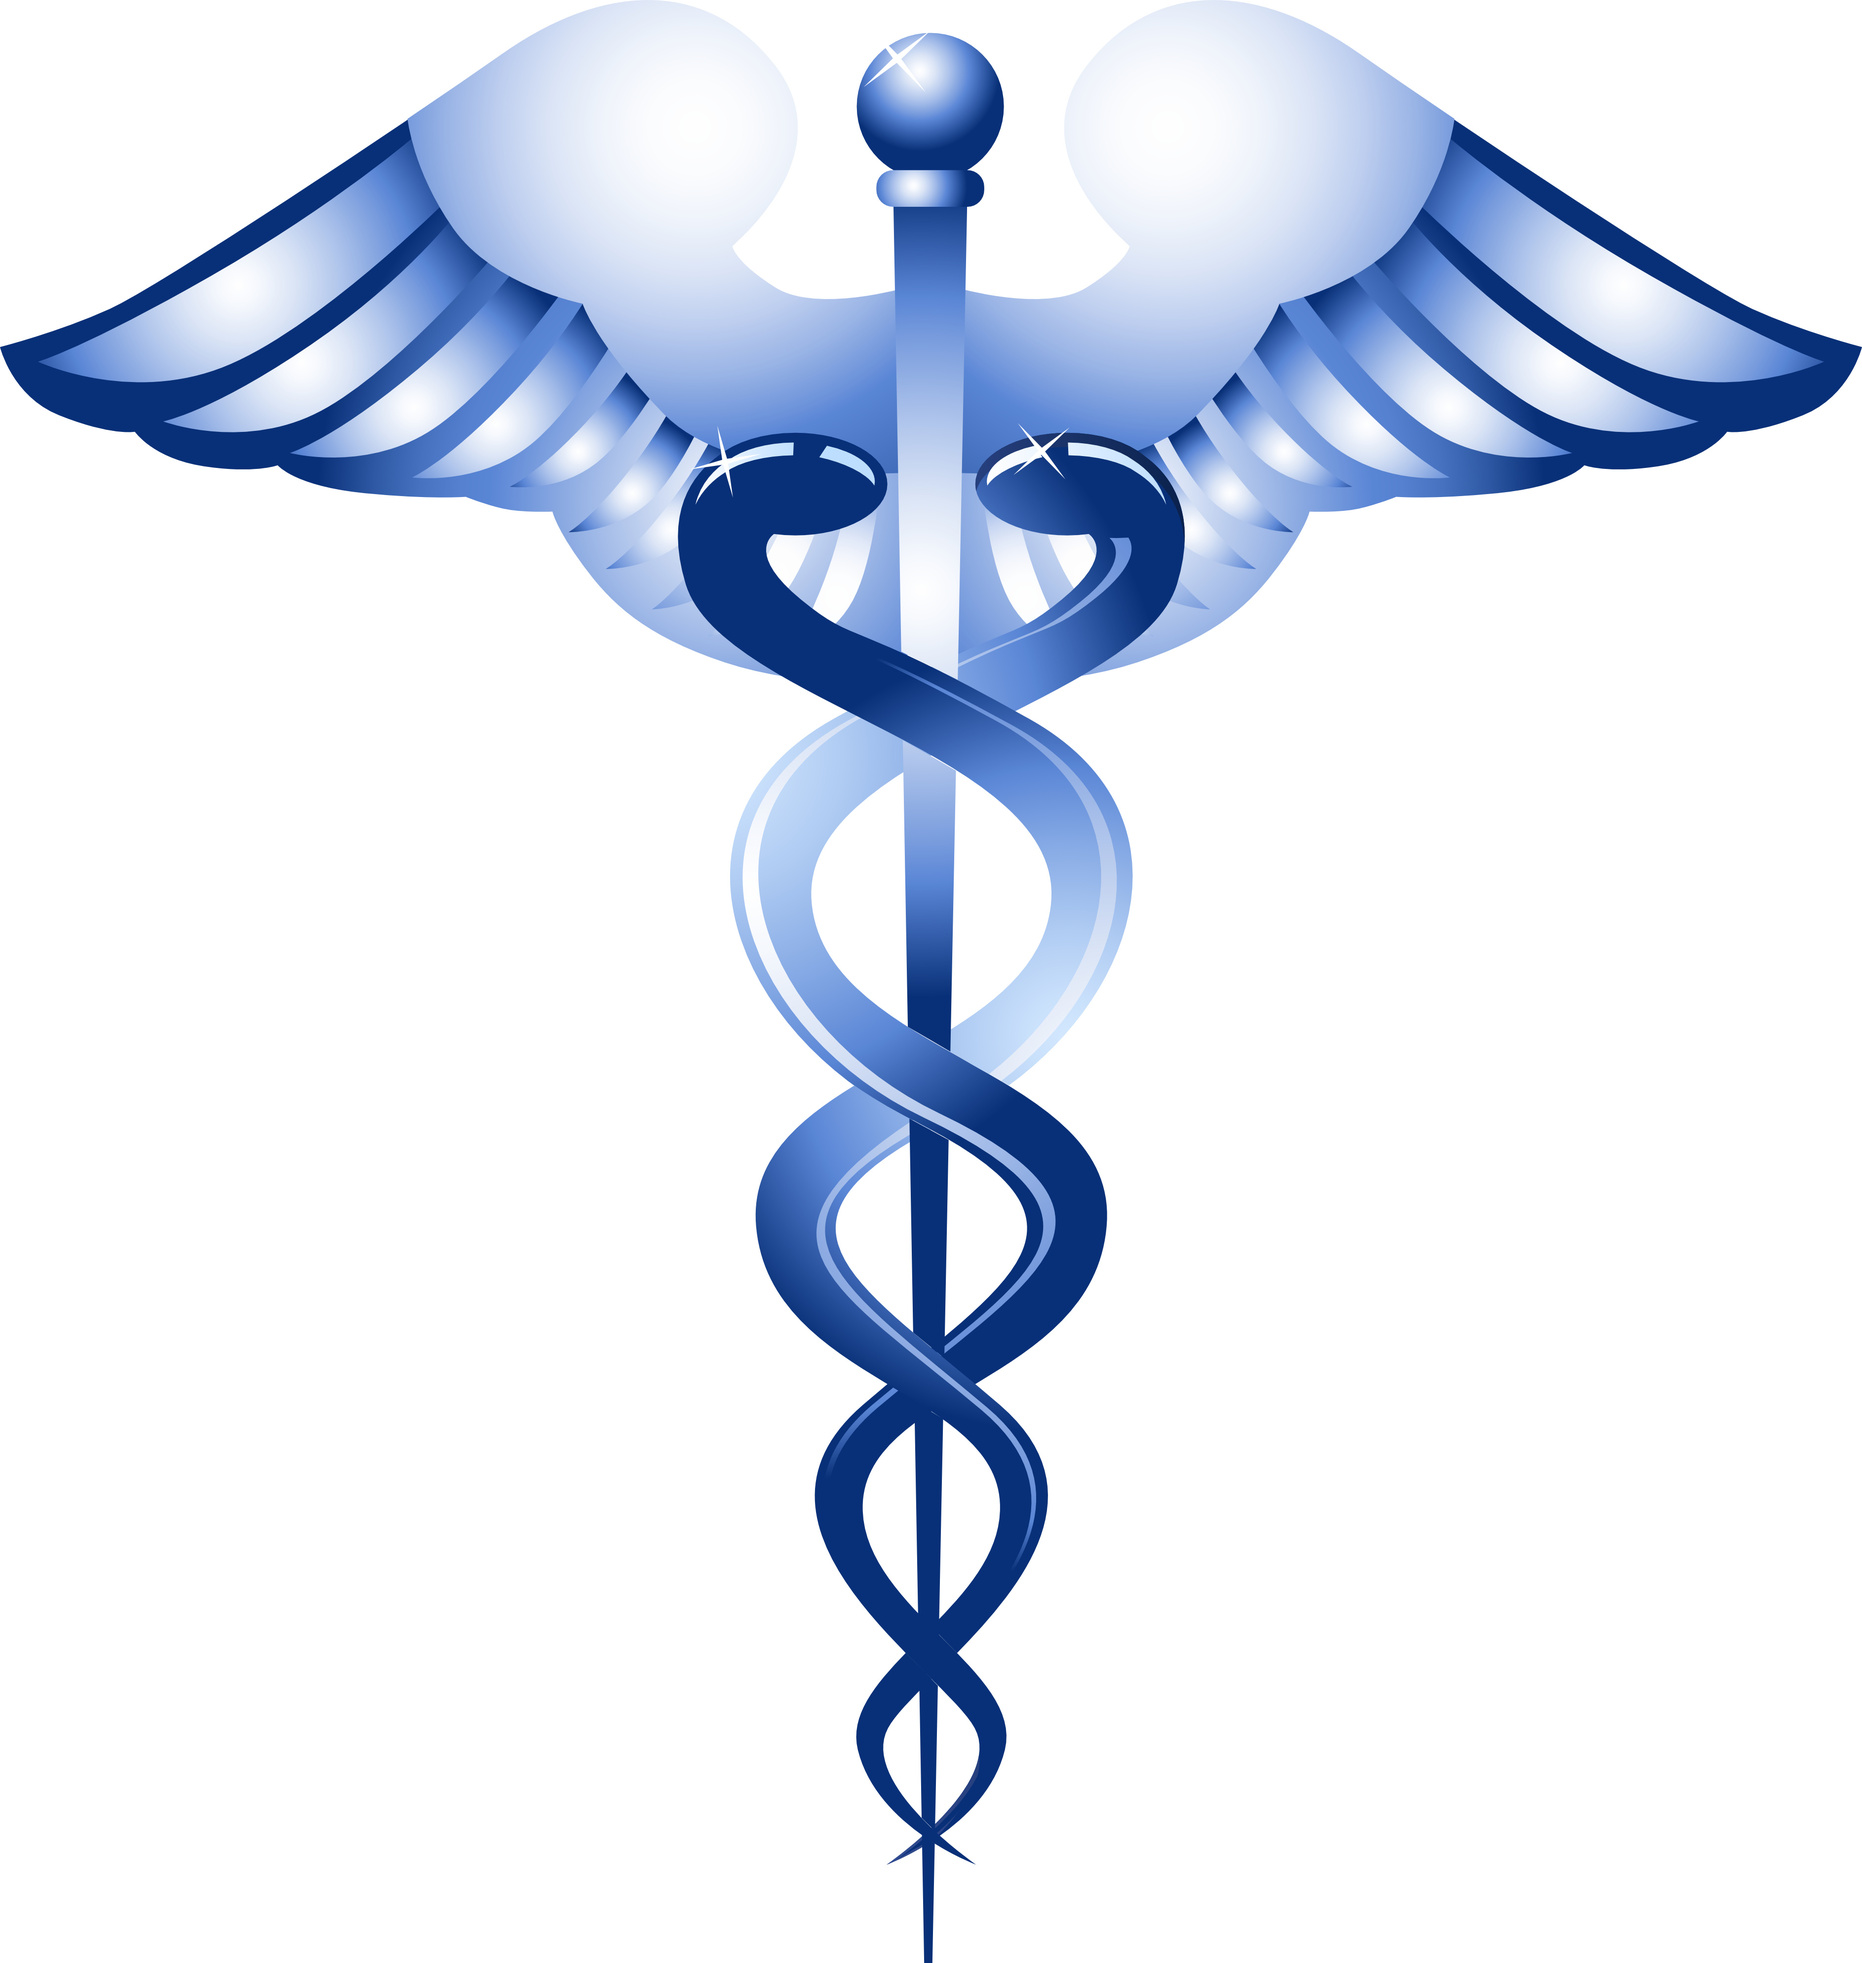 Free Pictures Of Medical Symbols, Download Free Clip Art.